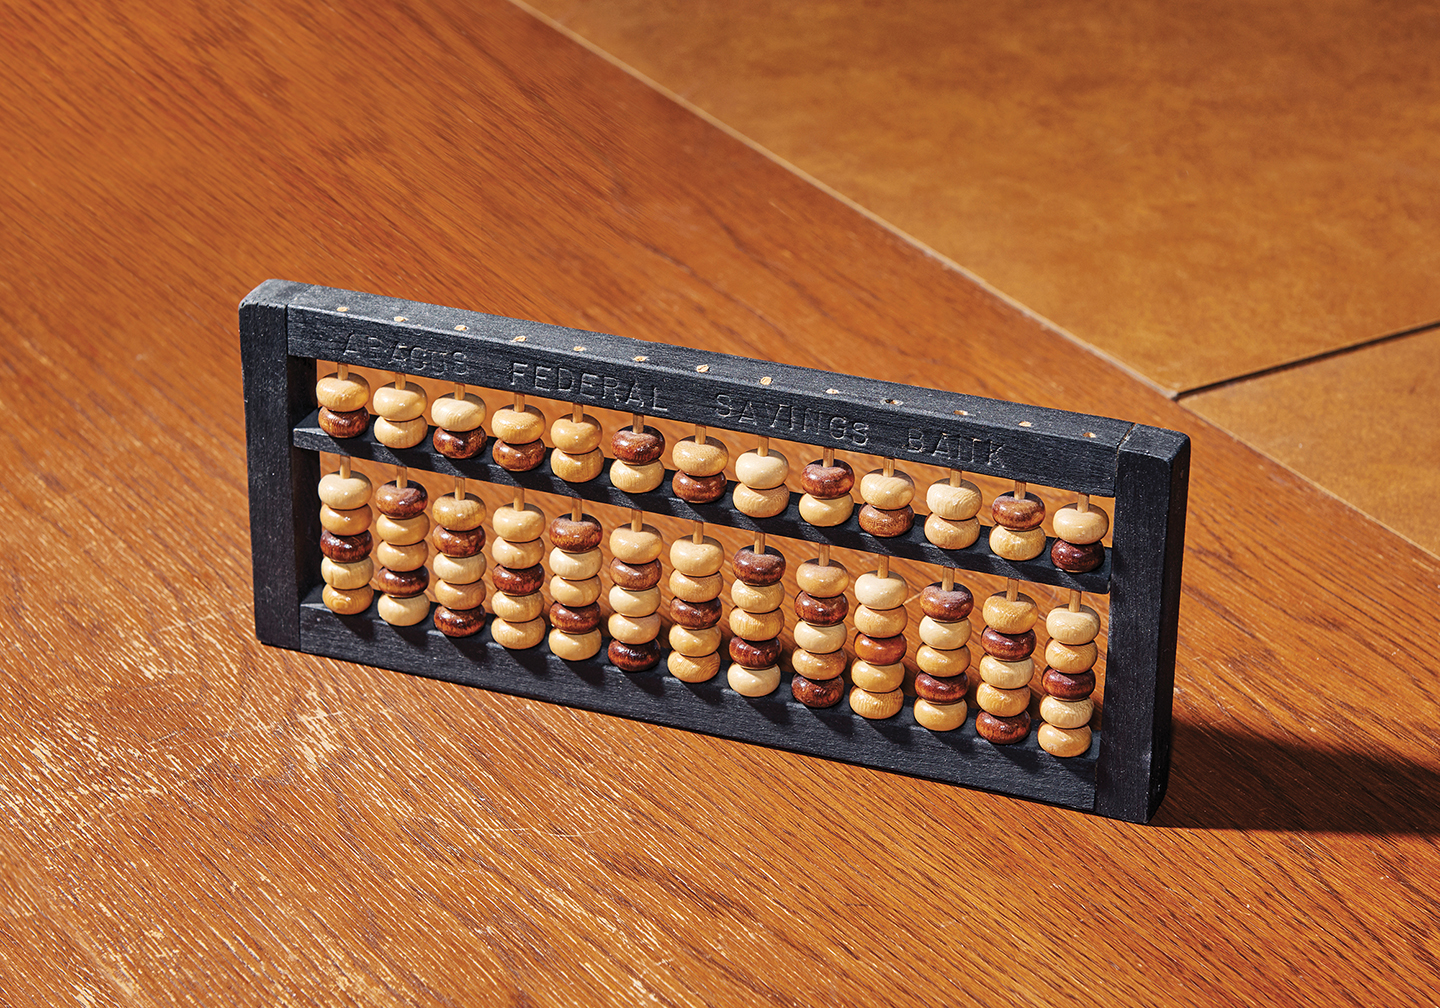 An abacus from the bank's collection.